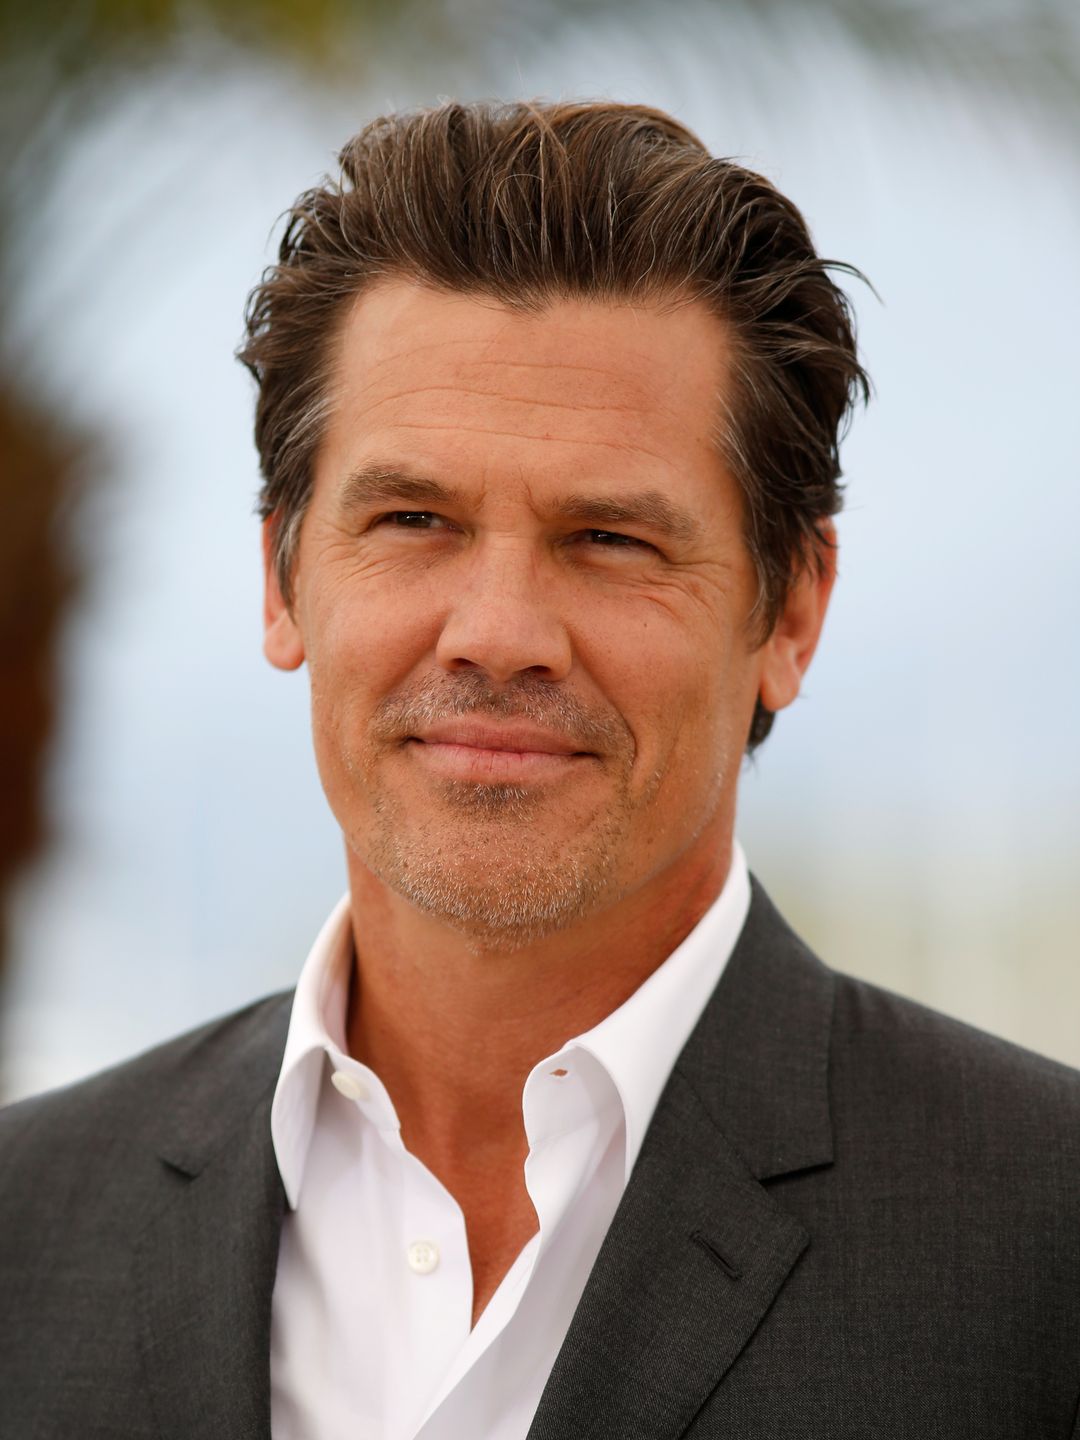 Josh Brolin does he have a wife